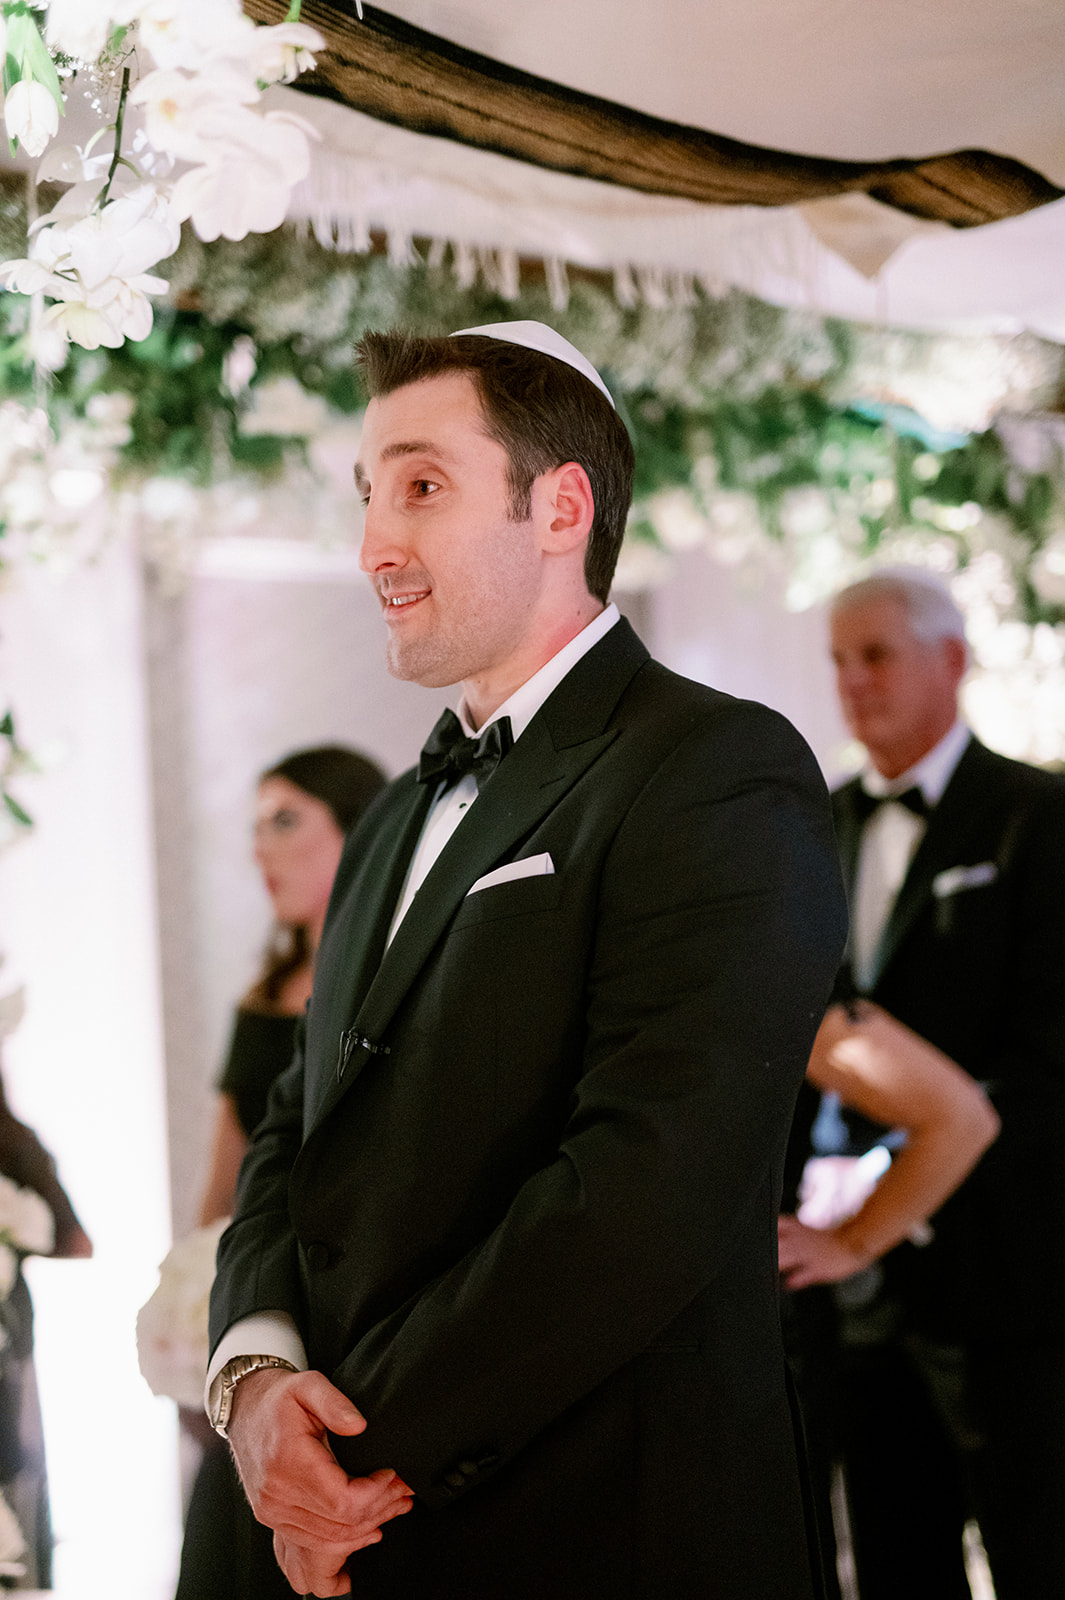 Groom reaction to bride walking down the aisle. 